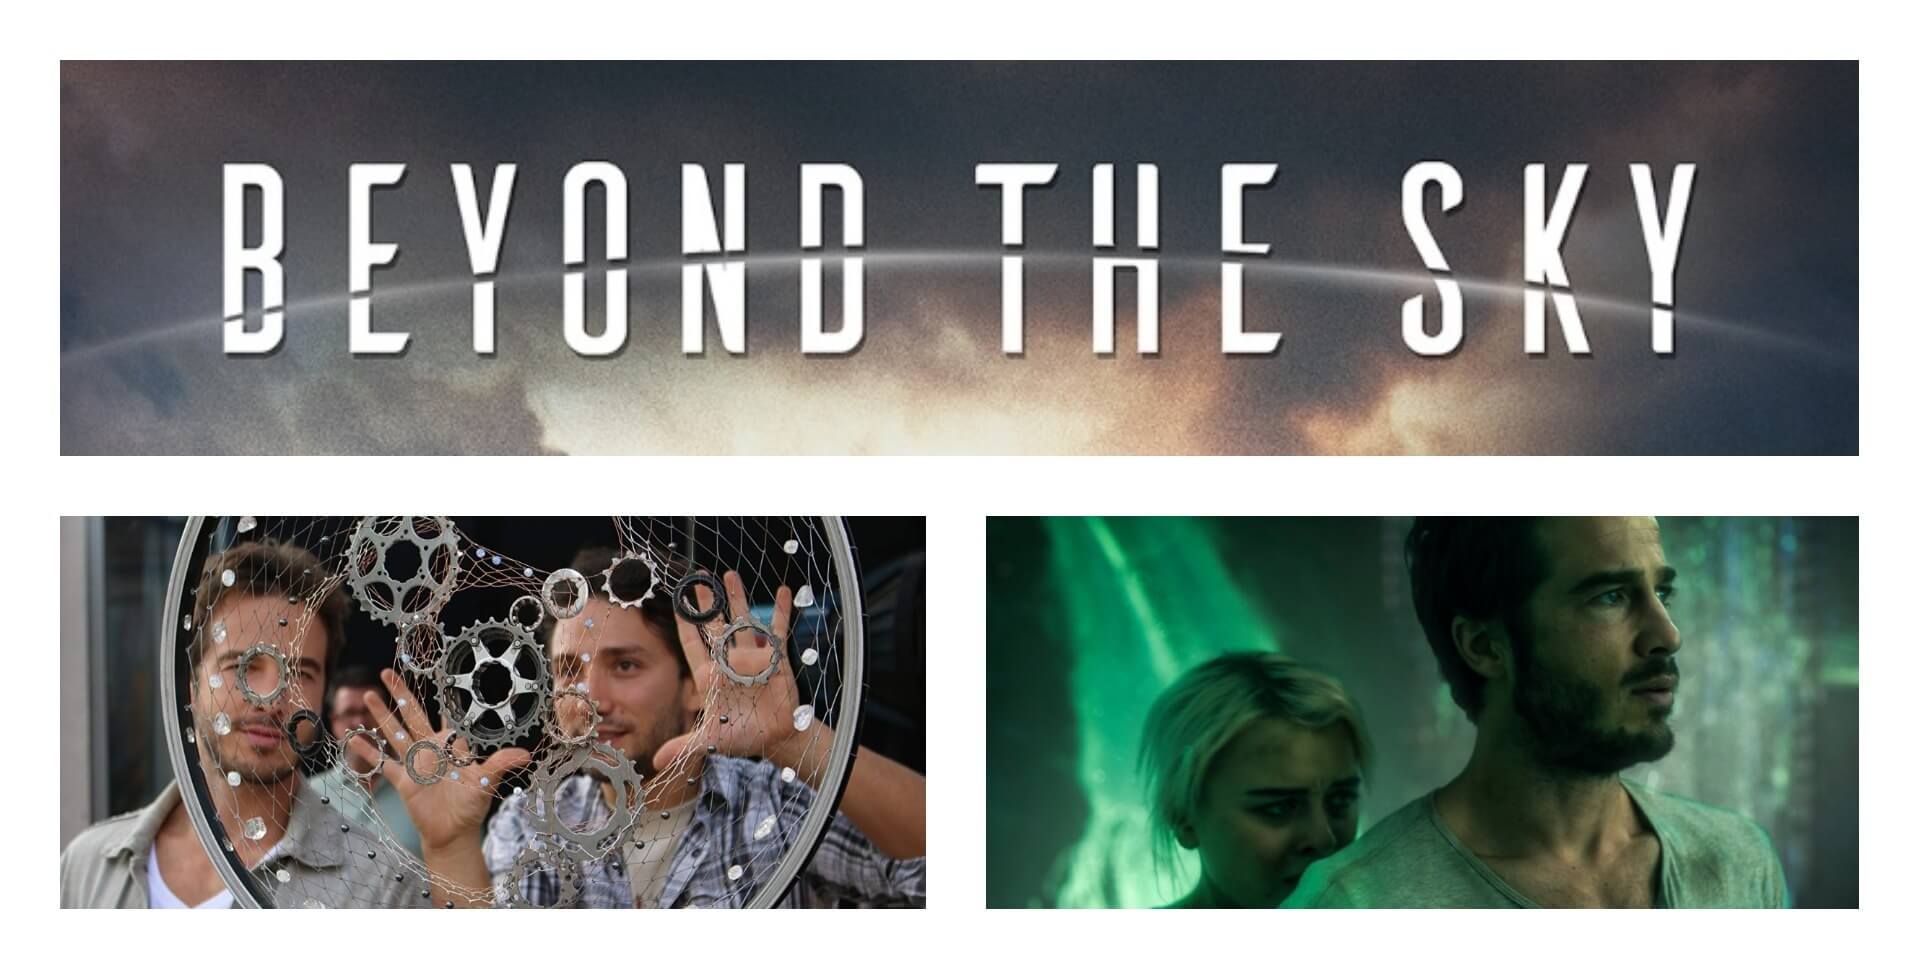 Beyond the Sky - Interview with Director Fulvio Sestito